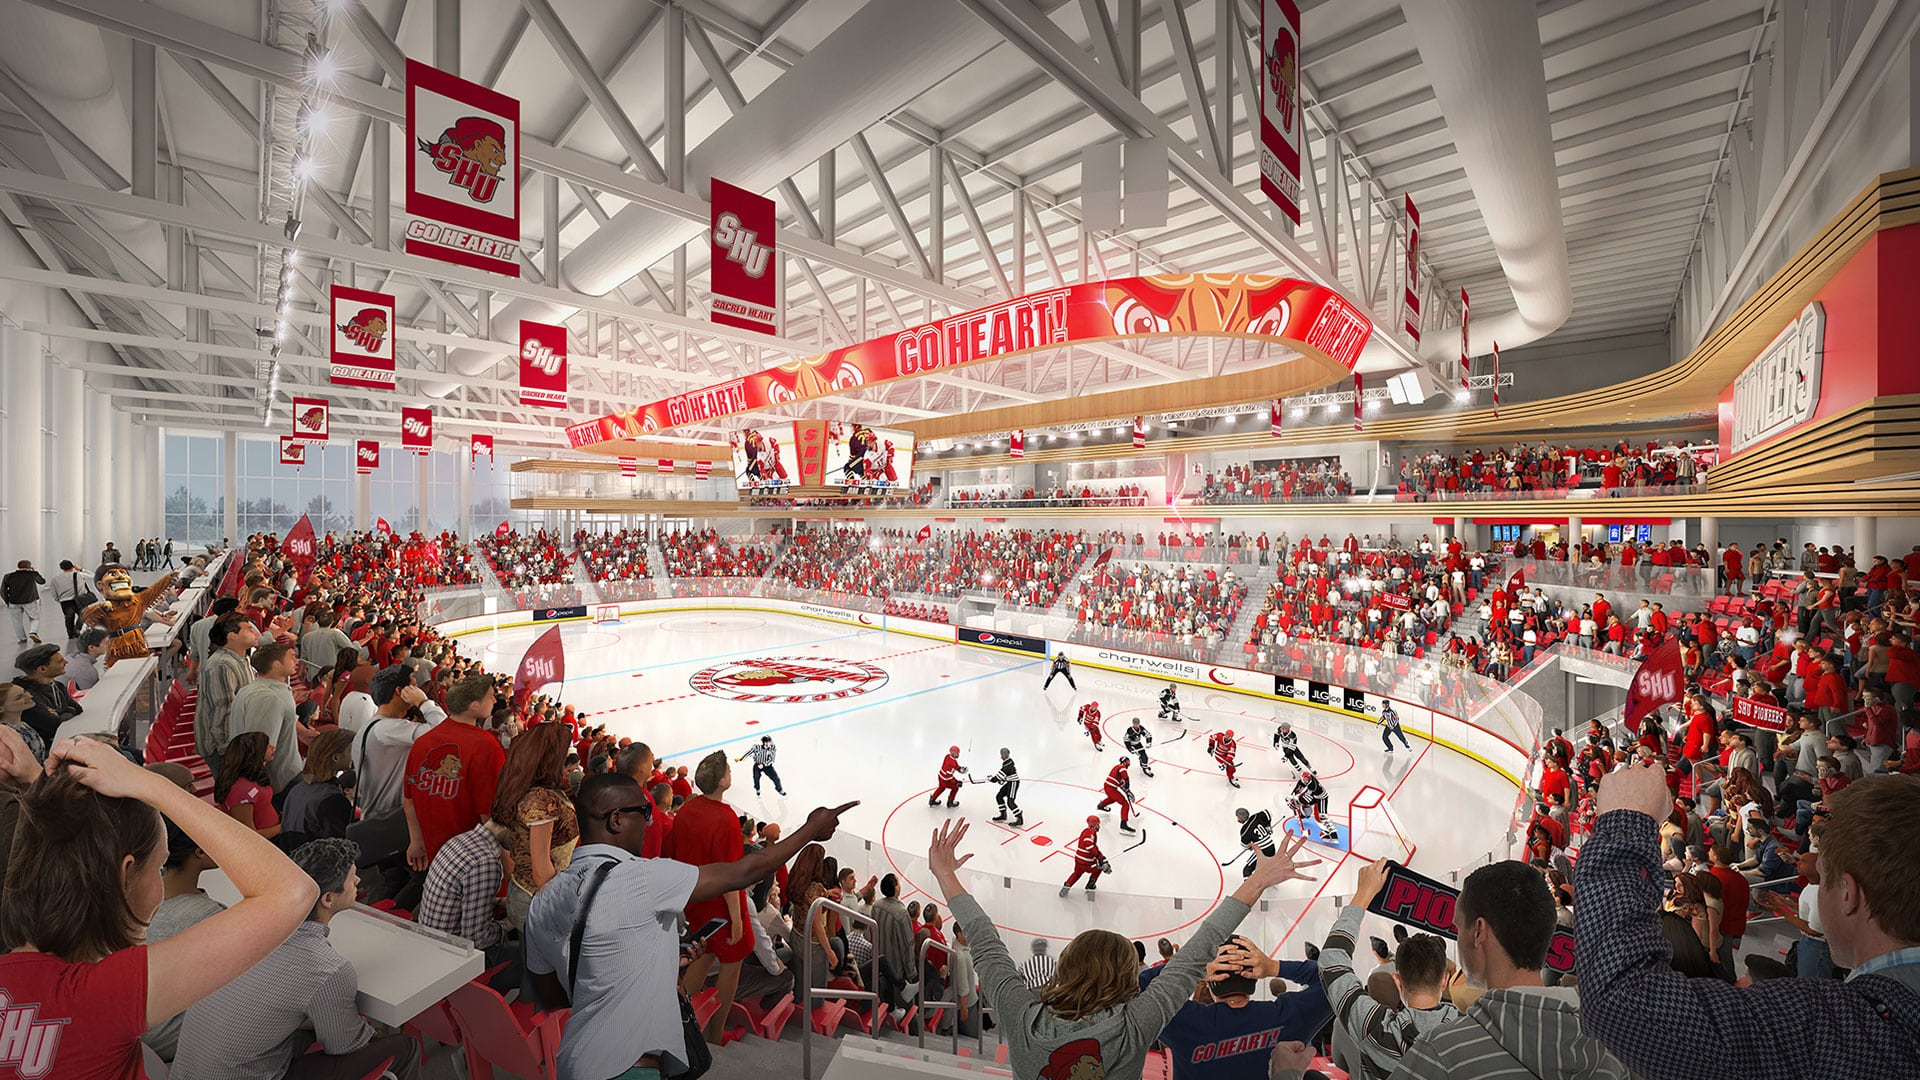 Martire Family Arena Construction Update, The countdown begins . . . 4️⃣  3️⃣ 1️⃣ days until the puck drops 🏒 #WeAreSHU, By Sacred Heart University